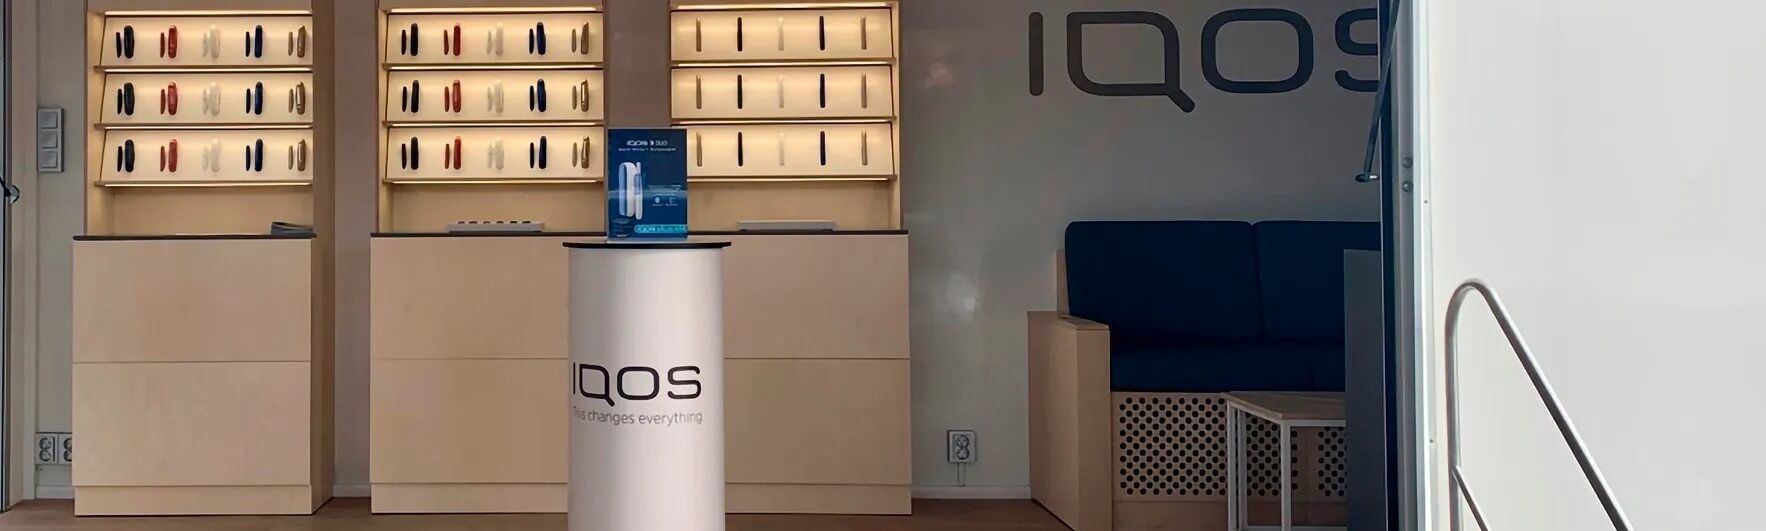 IQOS mobile stores - what are they?